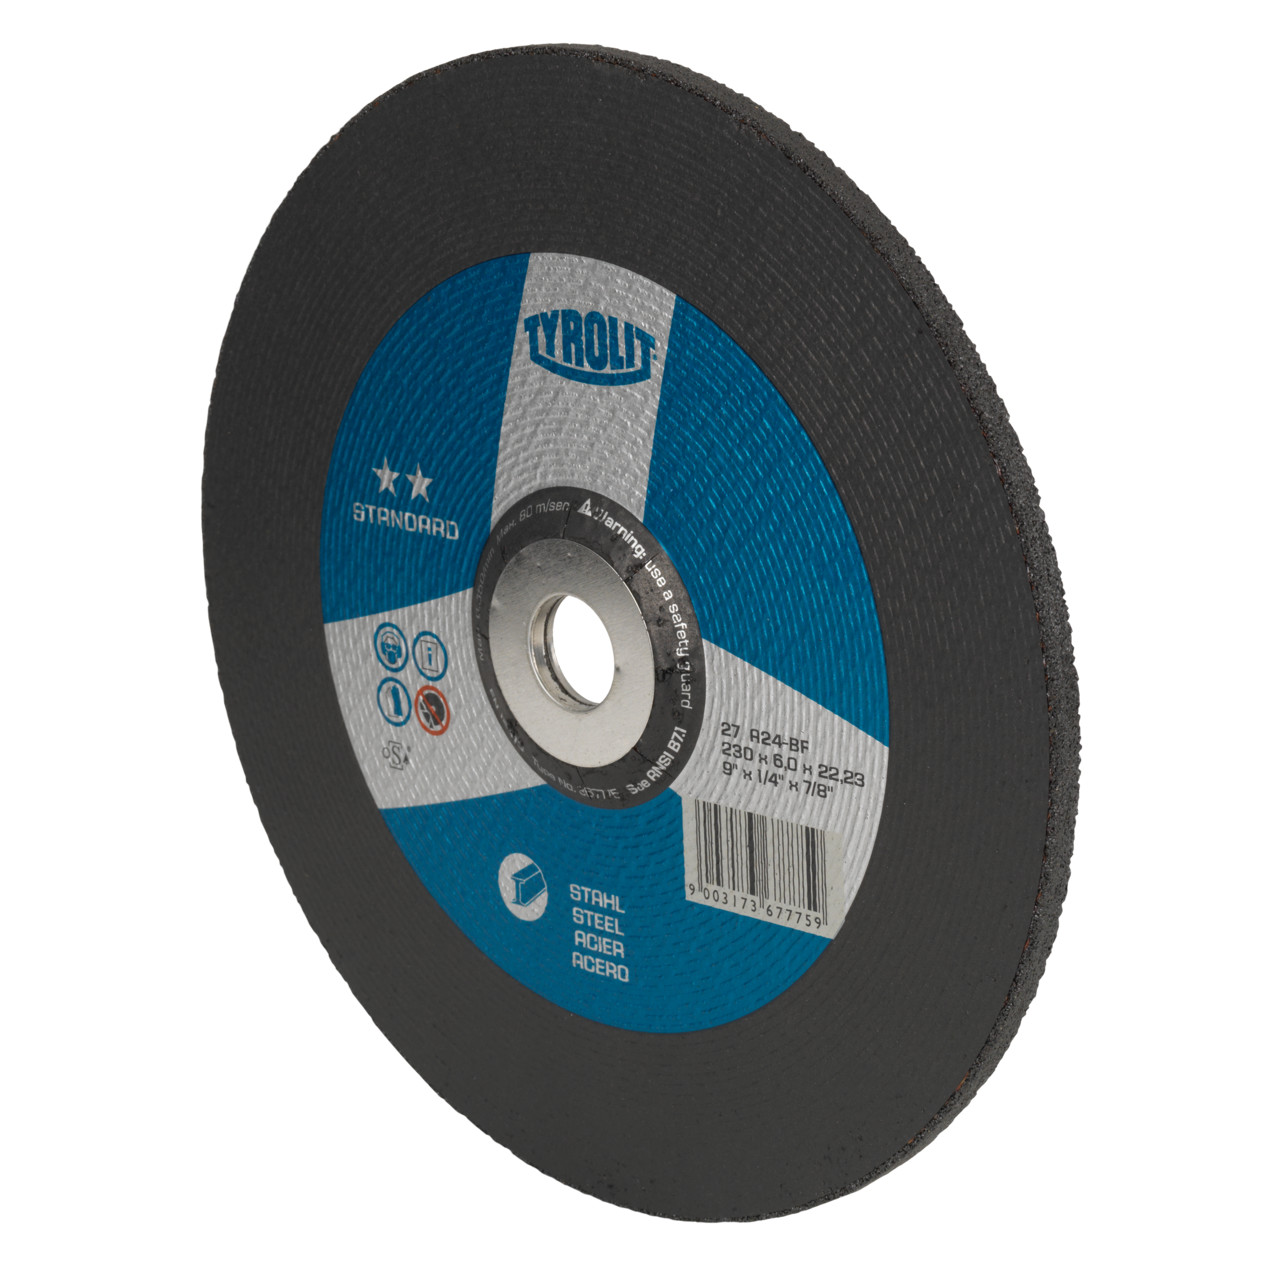 Tyrolit Roughing disc DxUxH 230x6x22.23 For steel, shape: 27 - offset version, Art. 367775